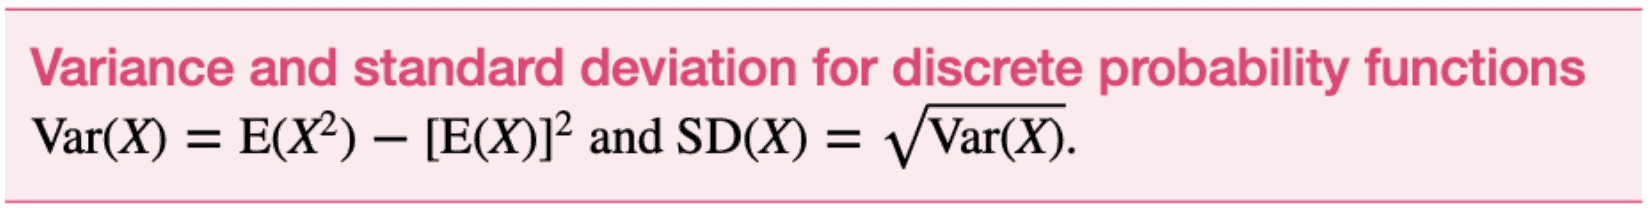 Variance and standard deviation for discrete probability functions